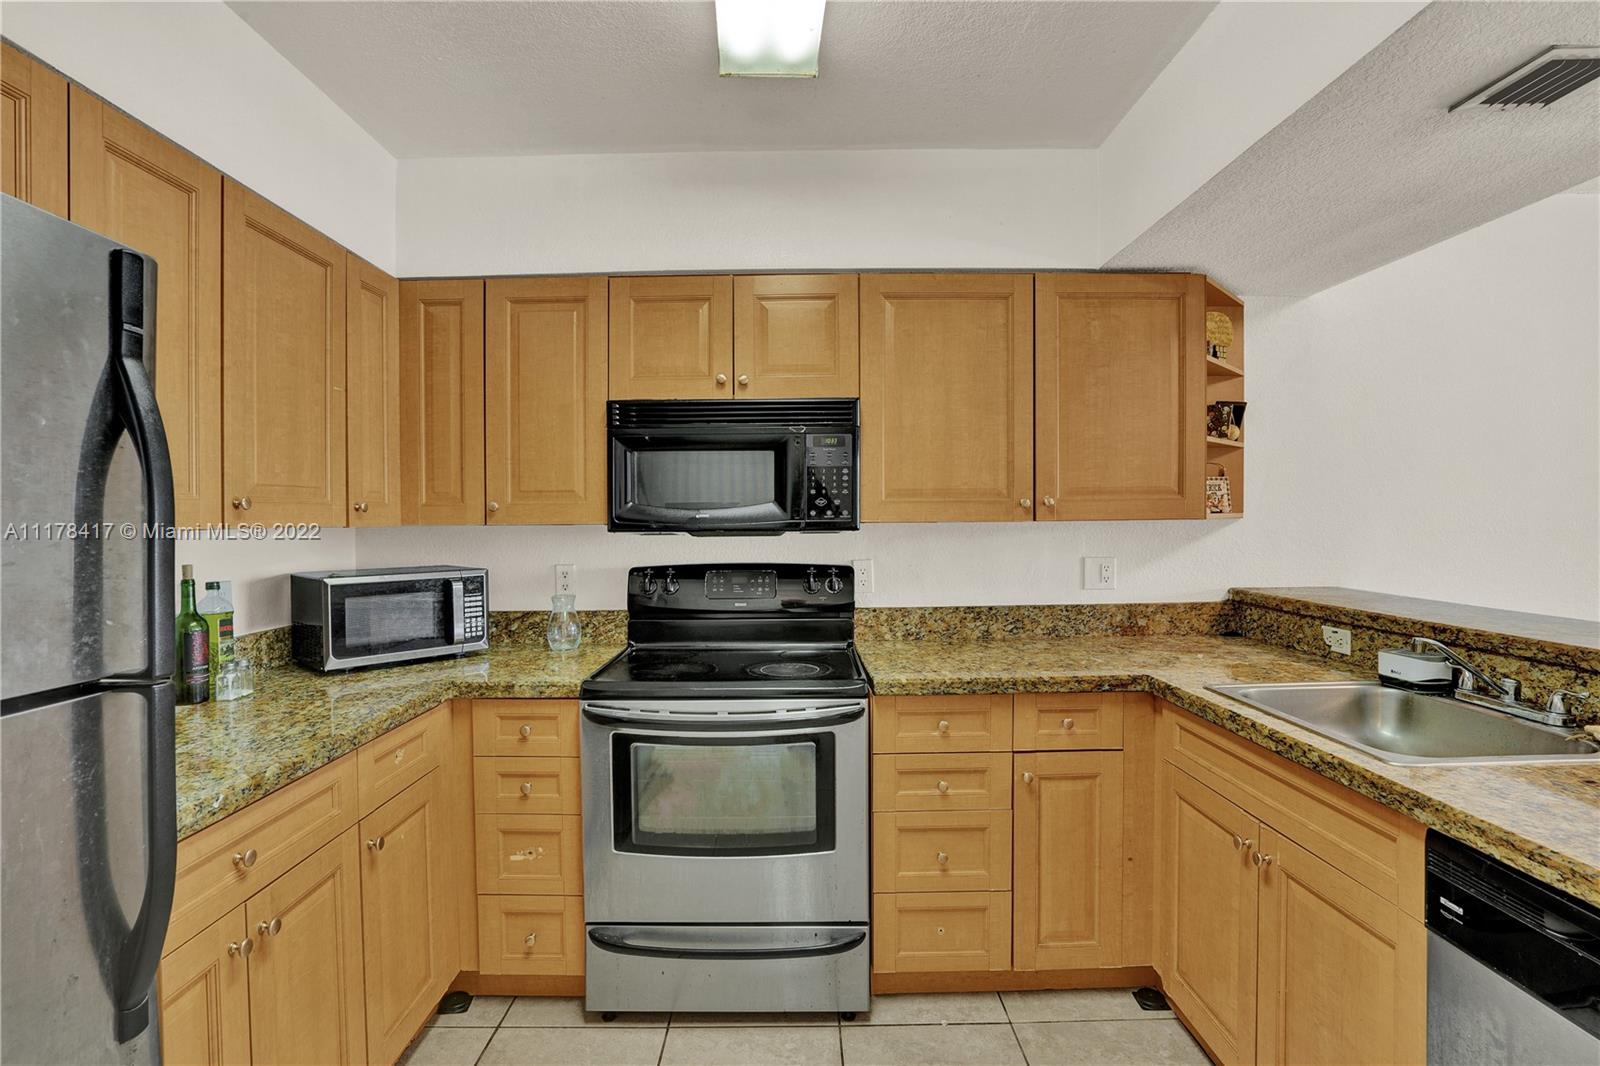 a kitchen with granite countertop a sink stove and microwave